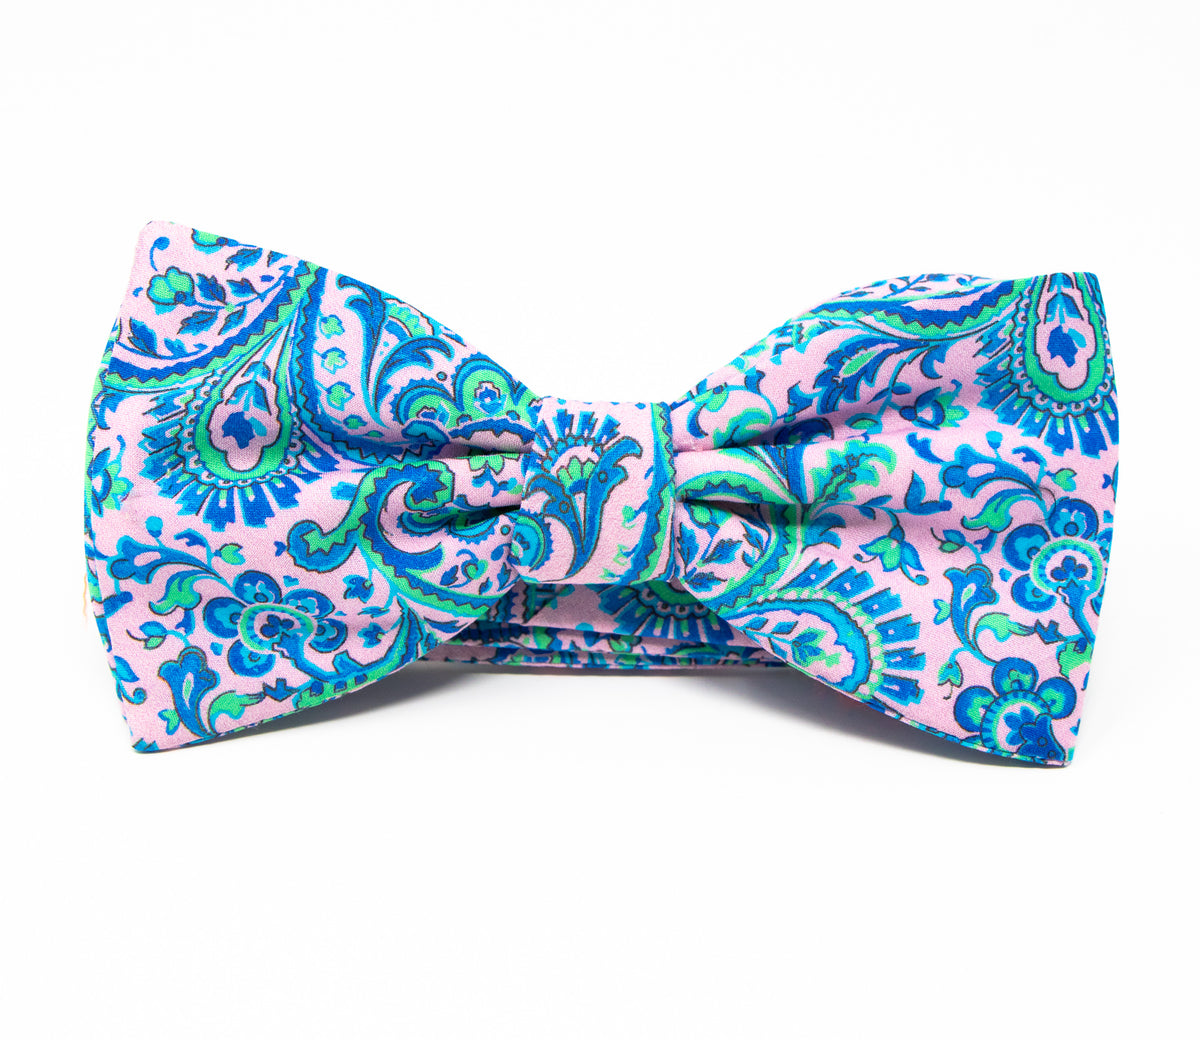 The Cameron Bow Tie - Premium Youth Size - Pre-Tied - H-Bomb Ties Ltd